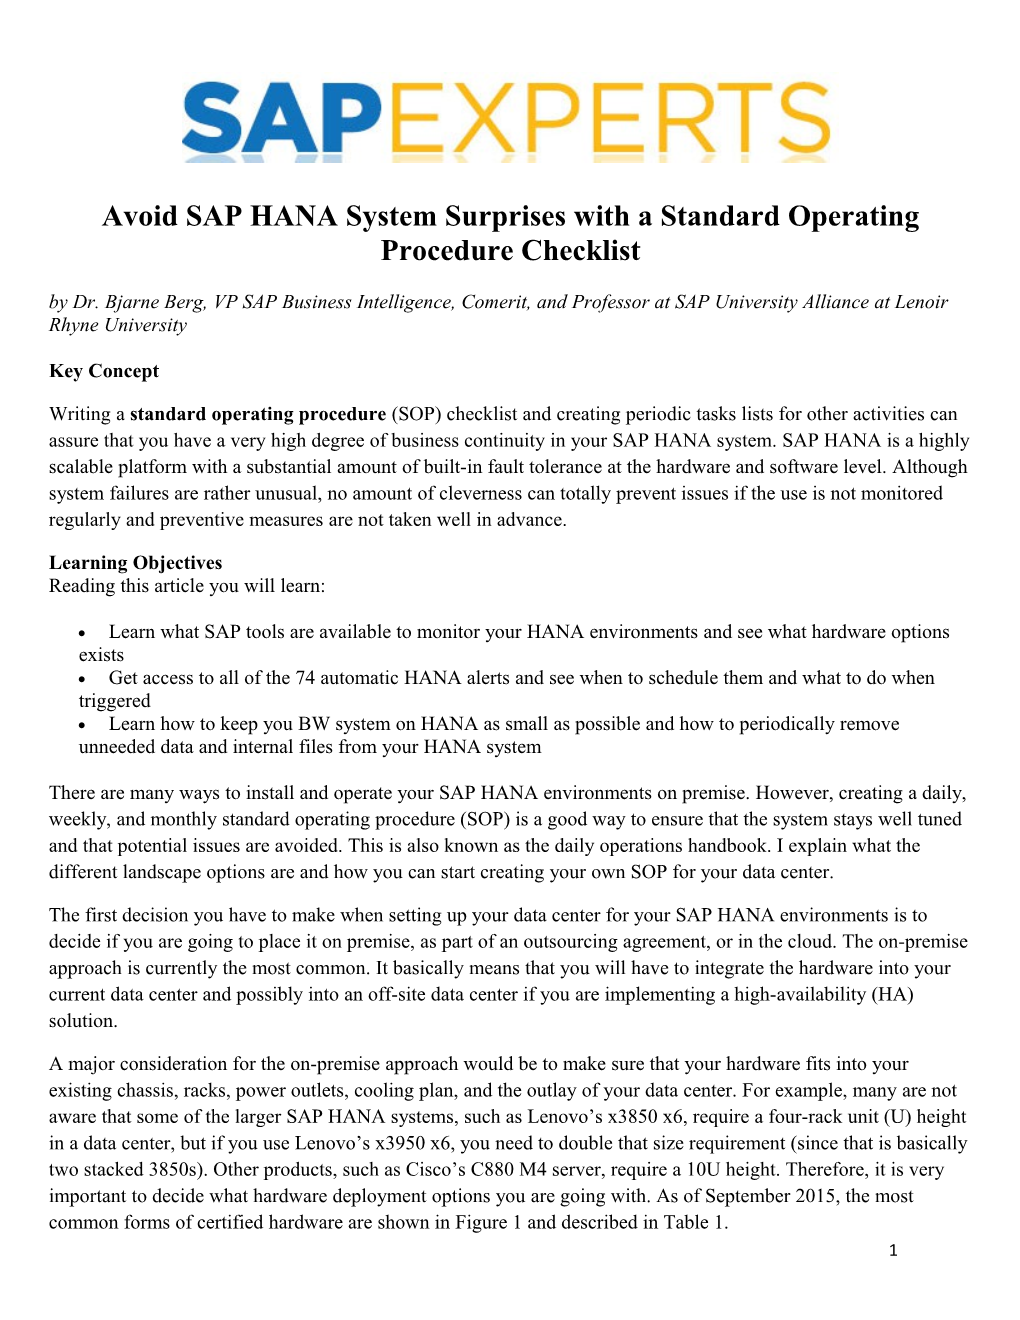 Avoid SAP HANA System Surprises with a Standard Operating Procedure Checklist